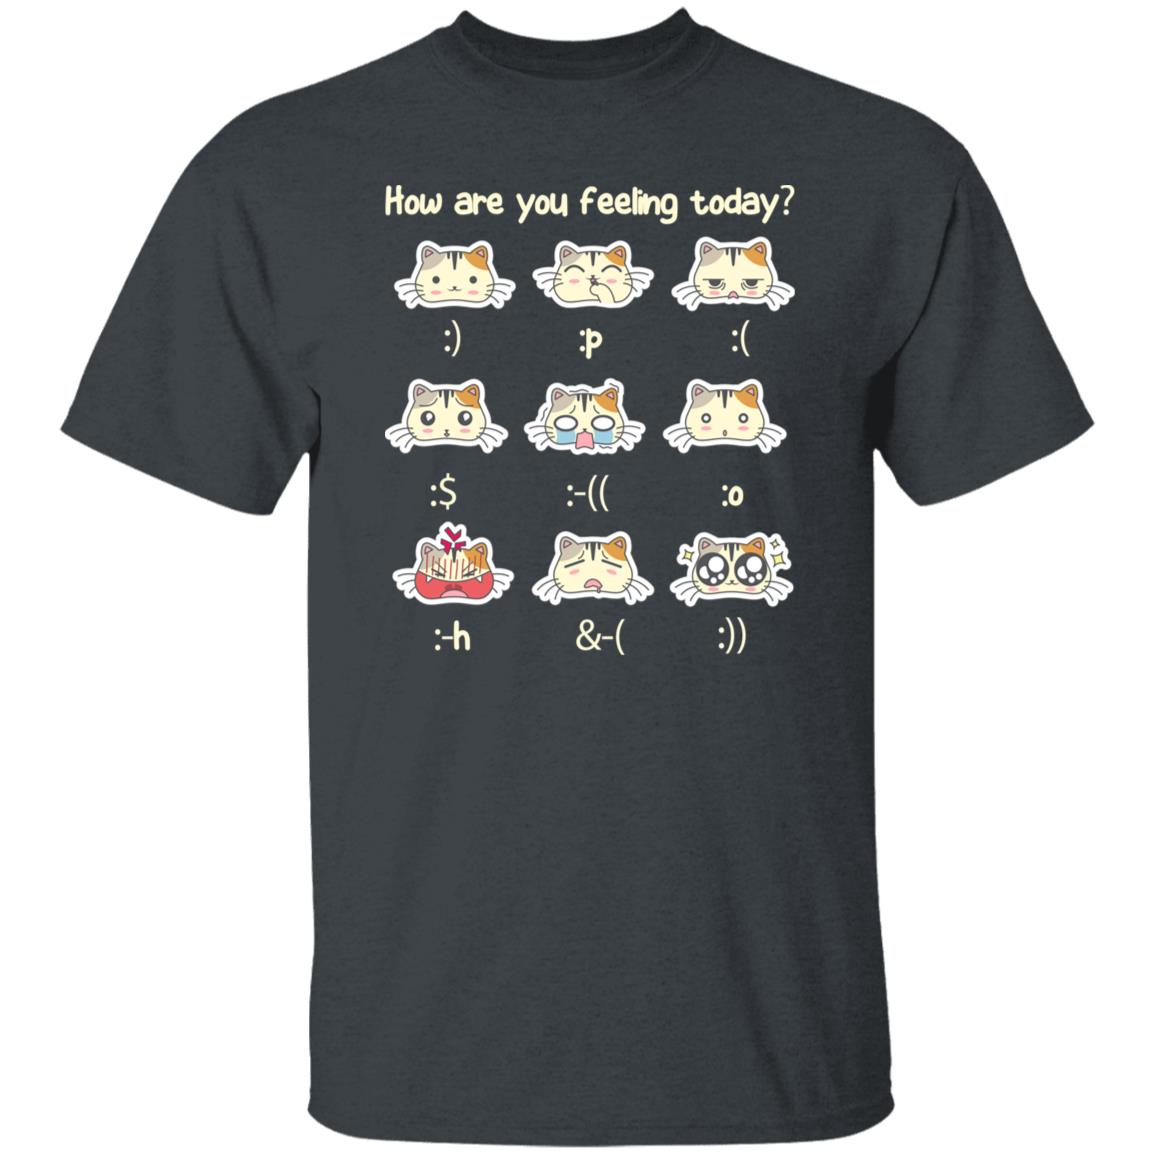 How are you feeling today Unisex shirt cat emoji Black Dark Heather-Family-Gift-Planet